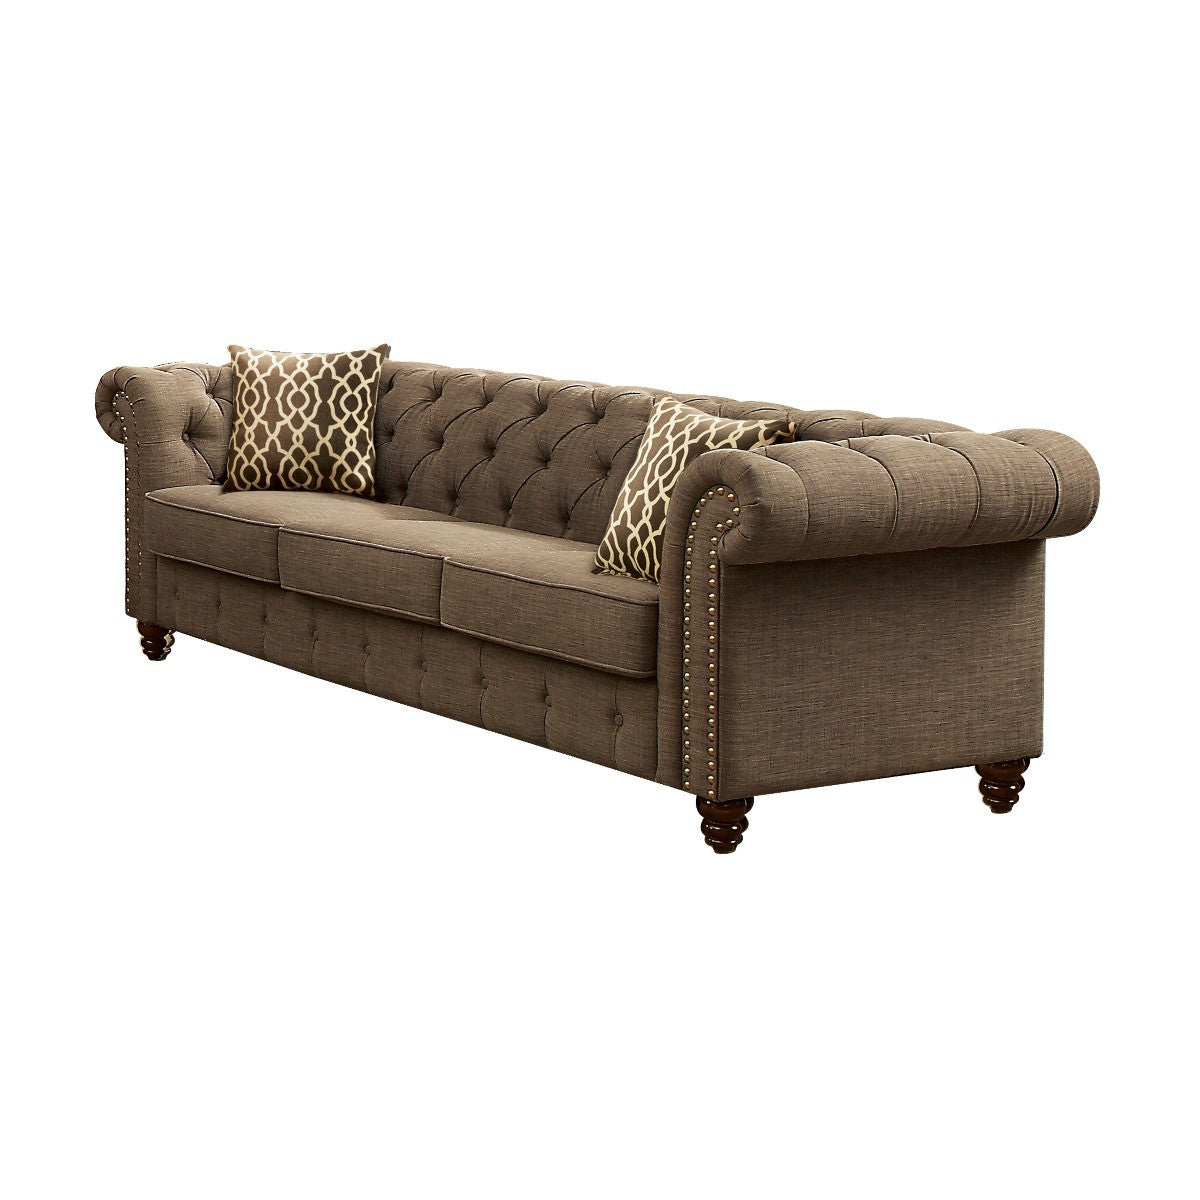 90" Brown Linen Sofa And Toss Pillows With Black Legs